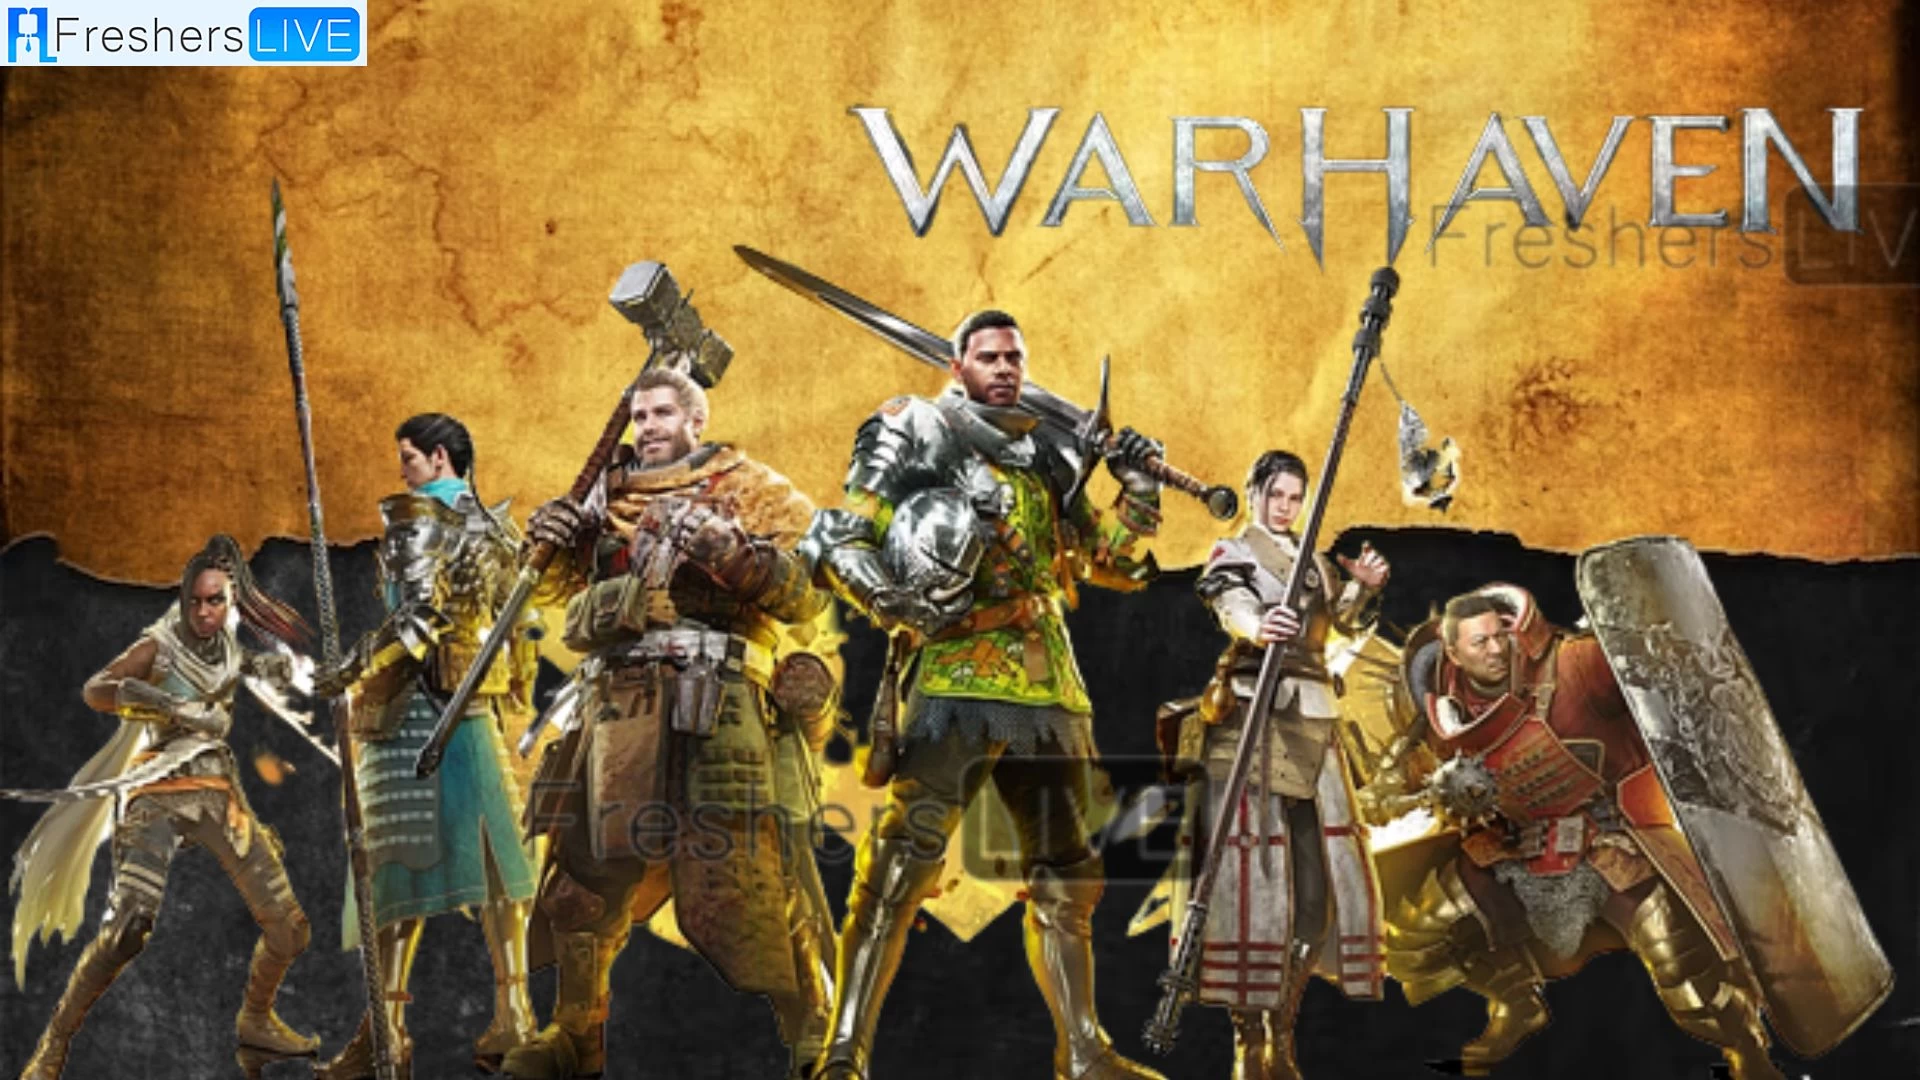 Warhaven Characters, Game Info, Gameplay, Trailer, and More